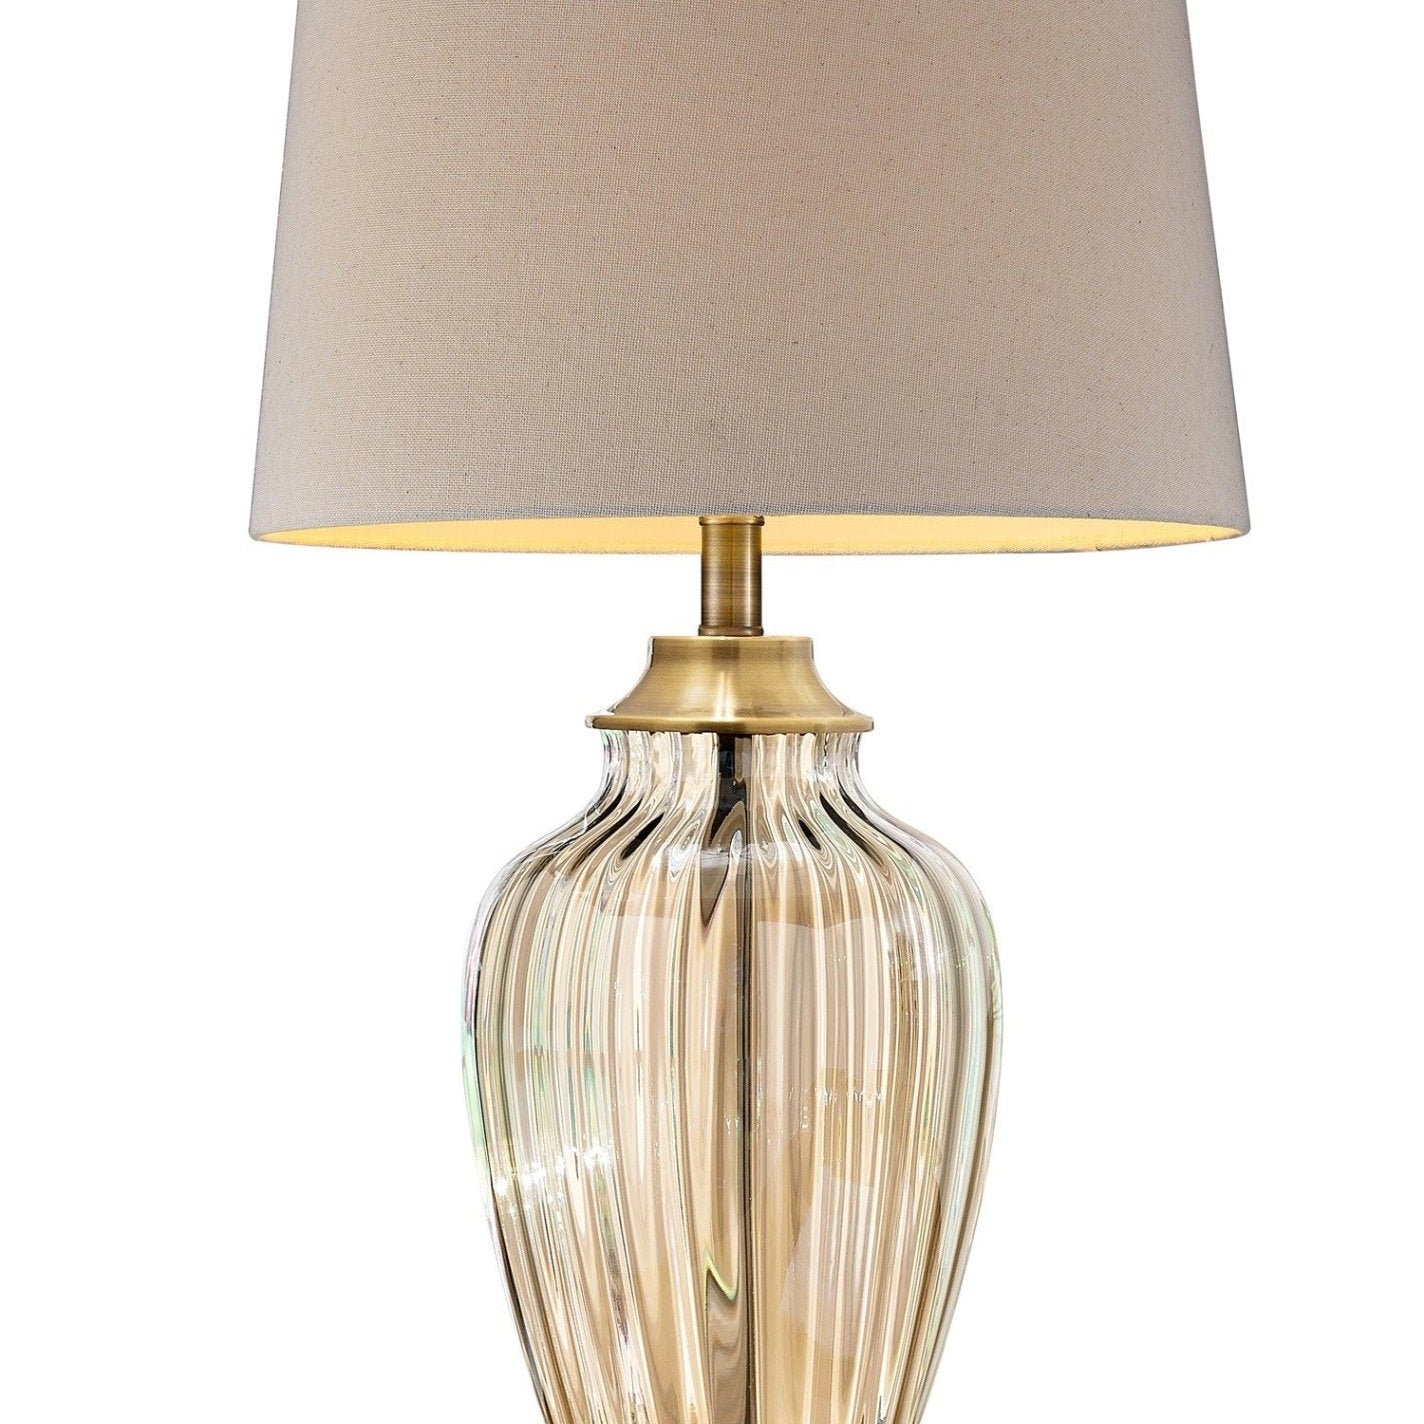 29" Bronze Metal Bedside Table Lamp With Tan Shade - Tuesday Morning-Table Lamps